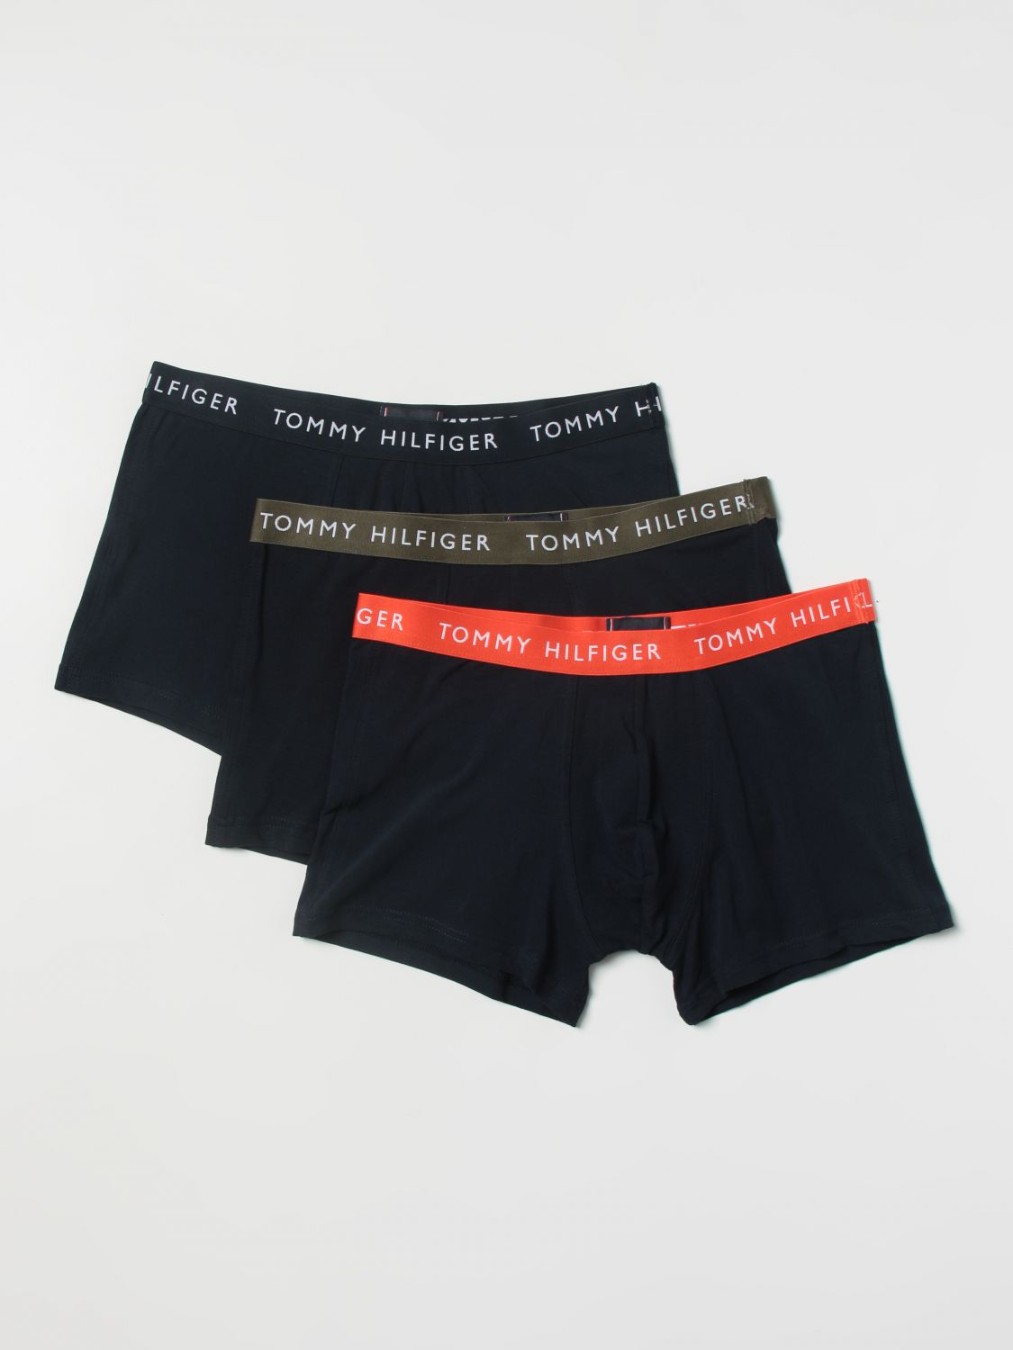 PACK 3 BOXERS 3P TRUNK WB